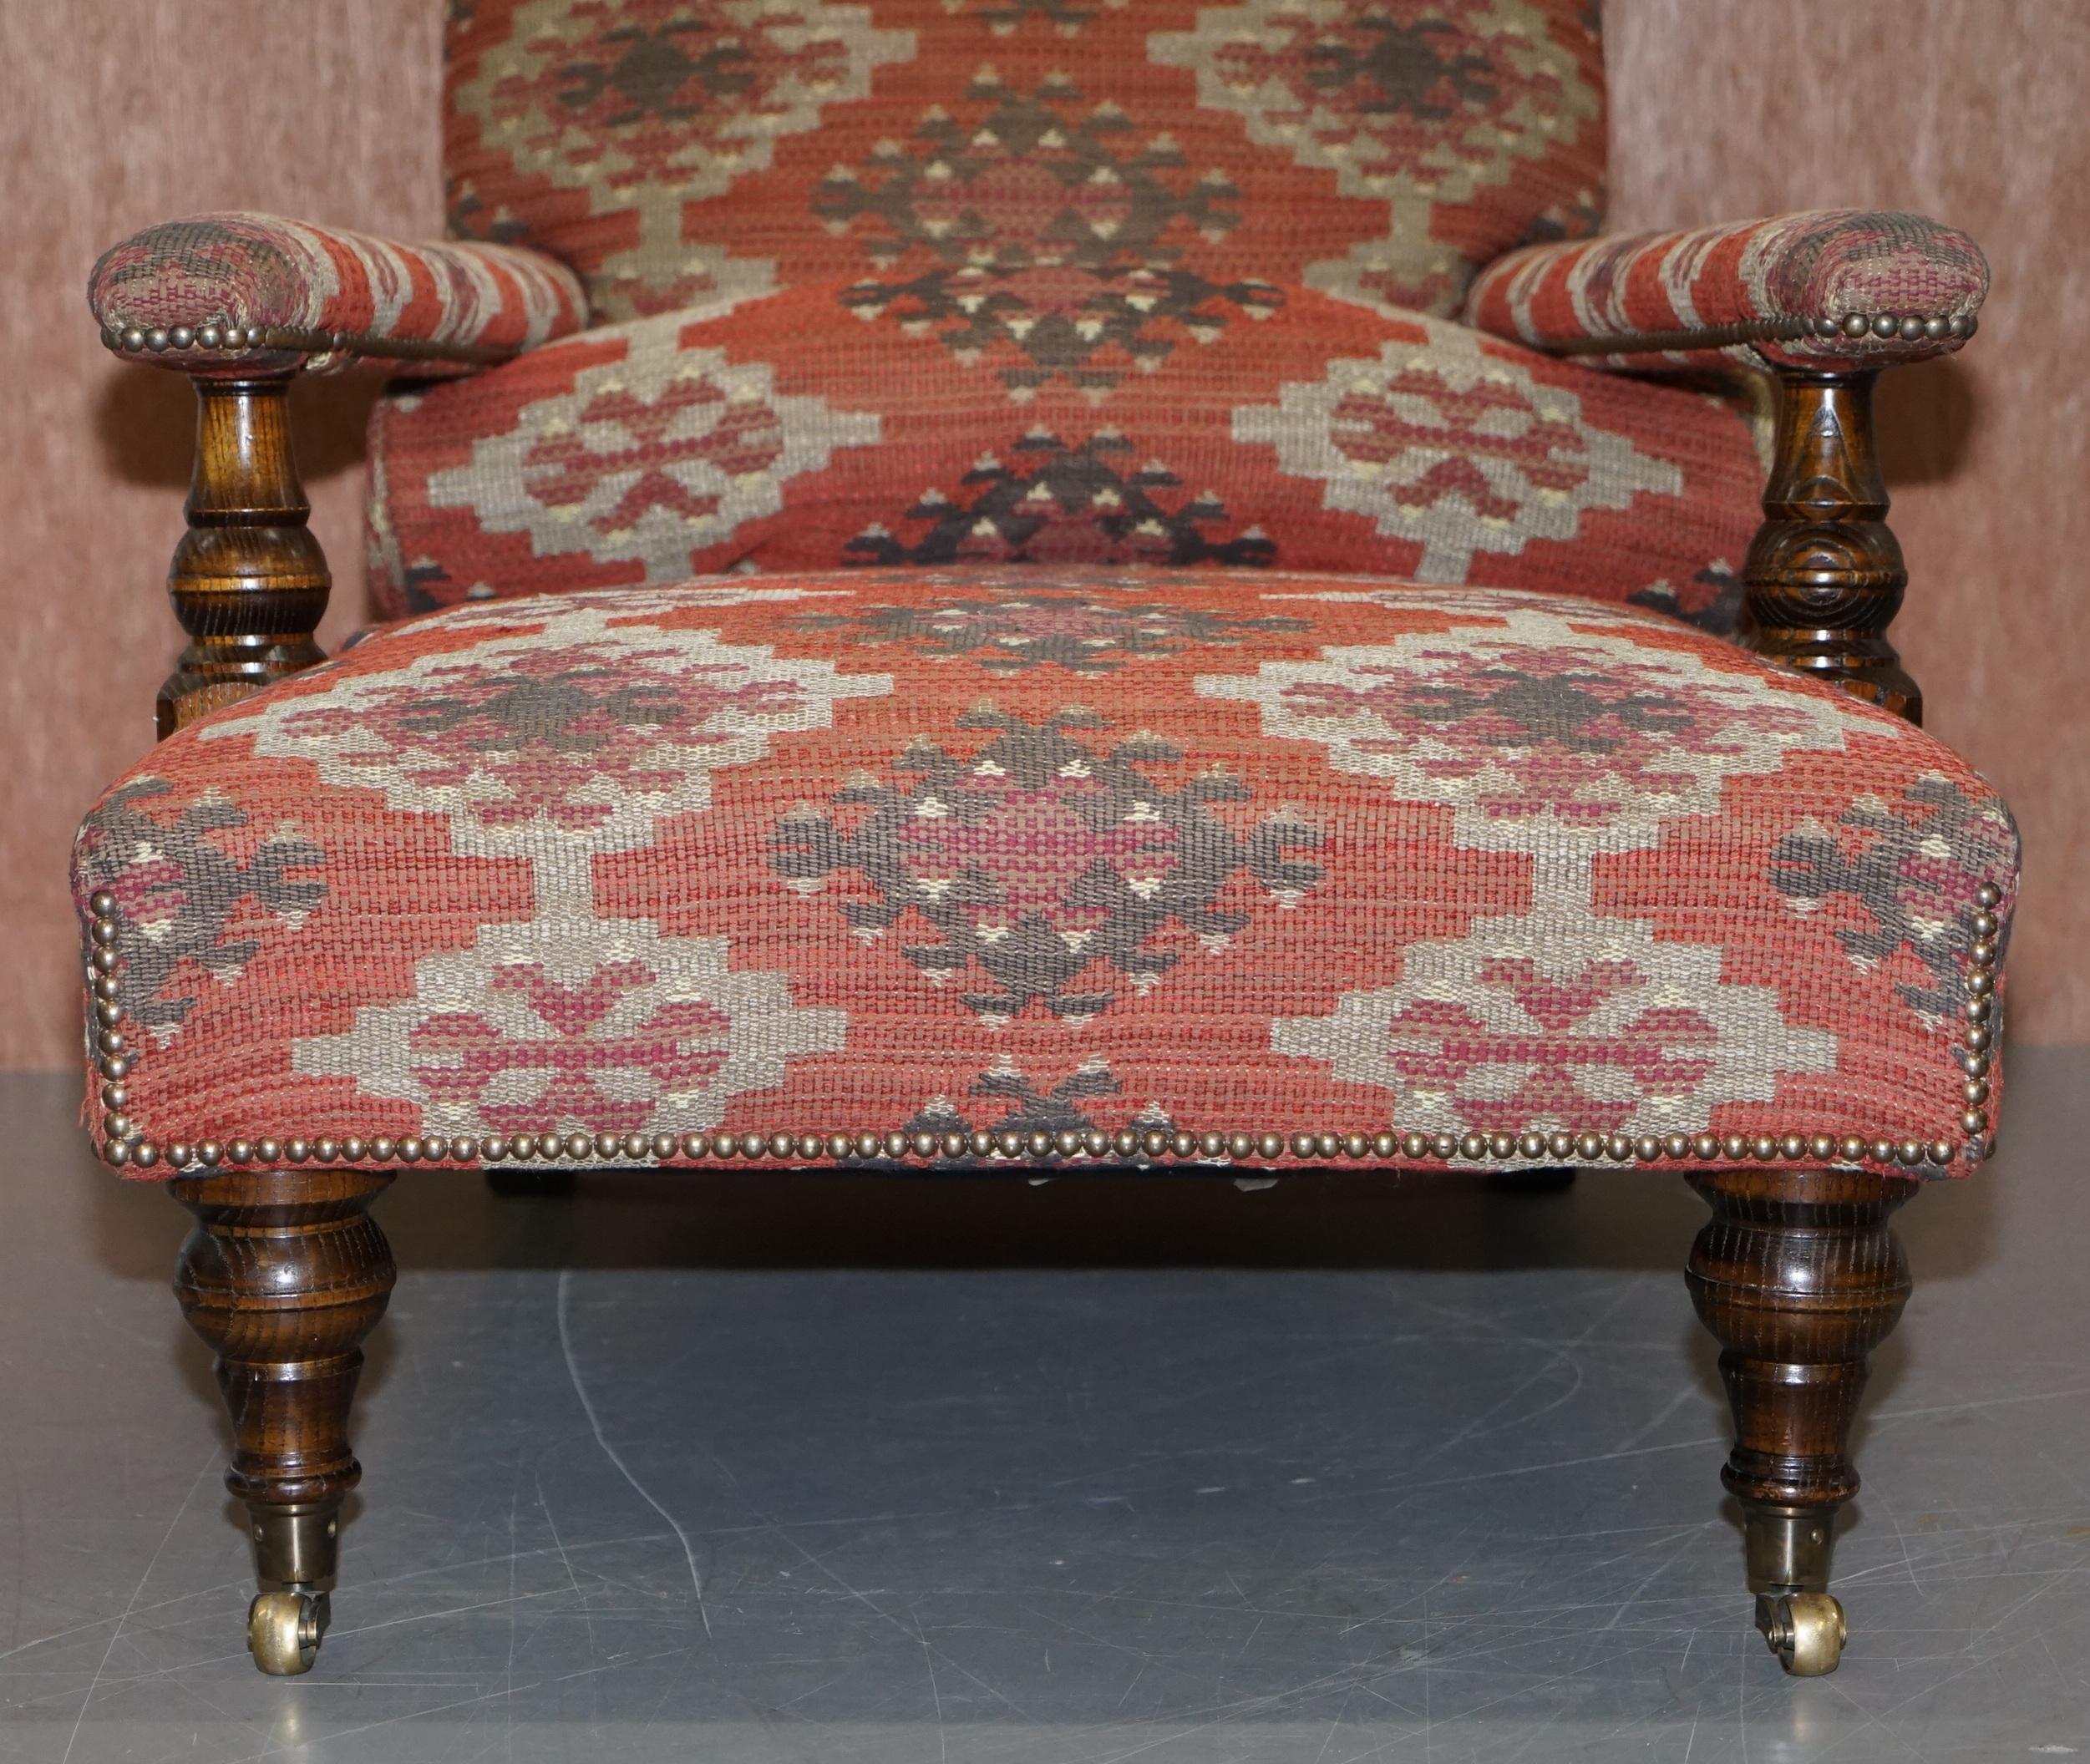 Upholstery Pair of George Smith Kilim Upholstered Edwardian Library Armchairs